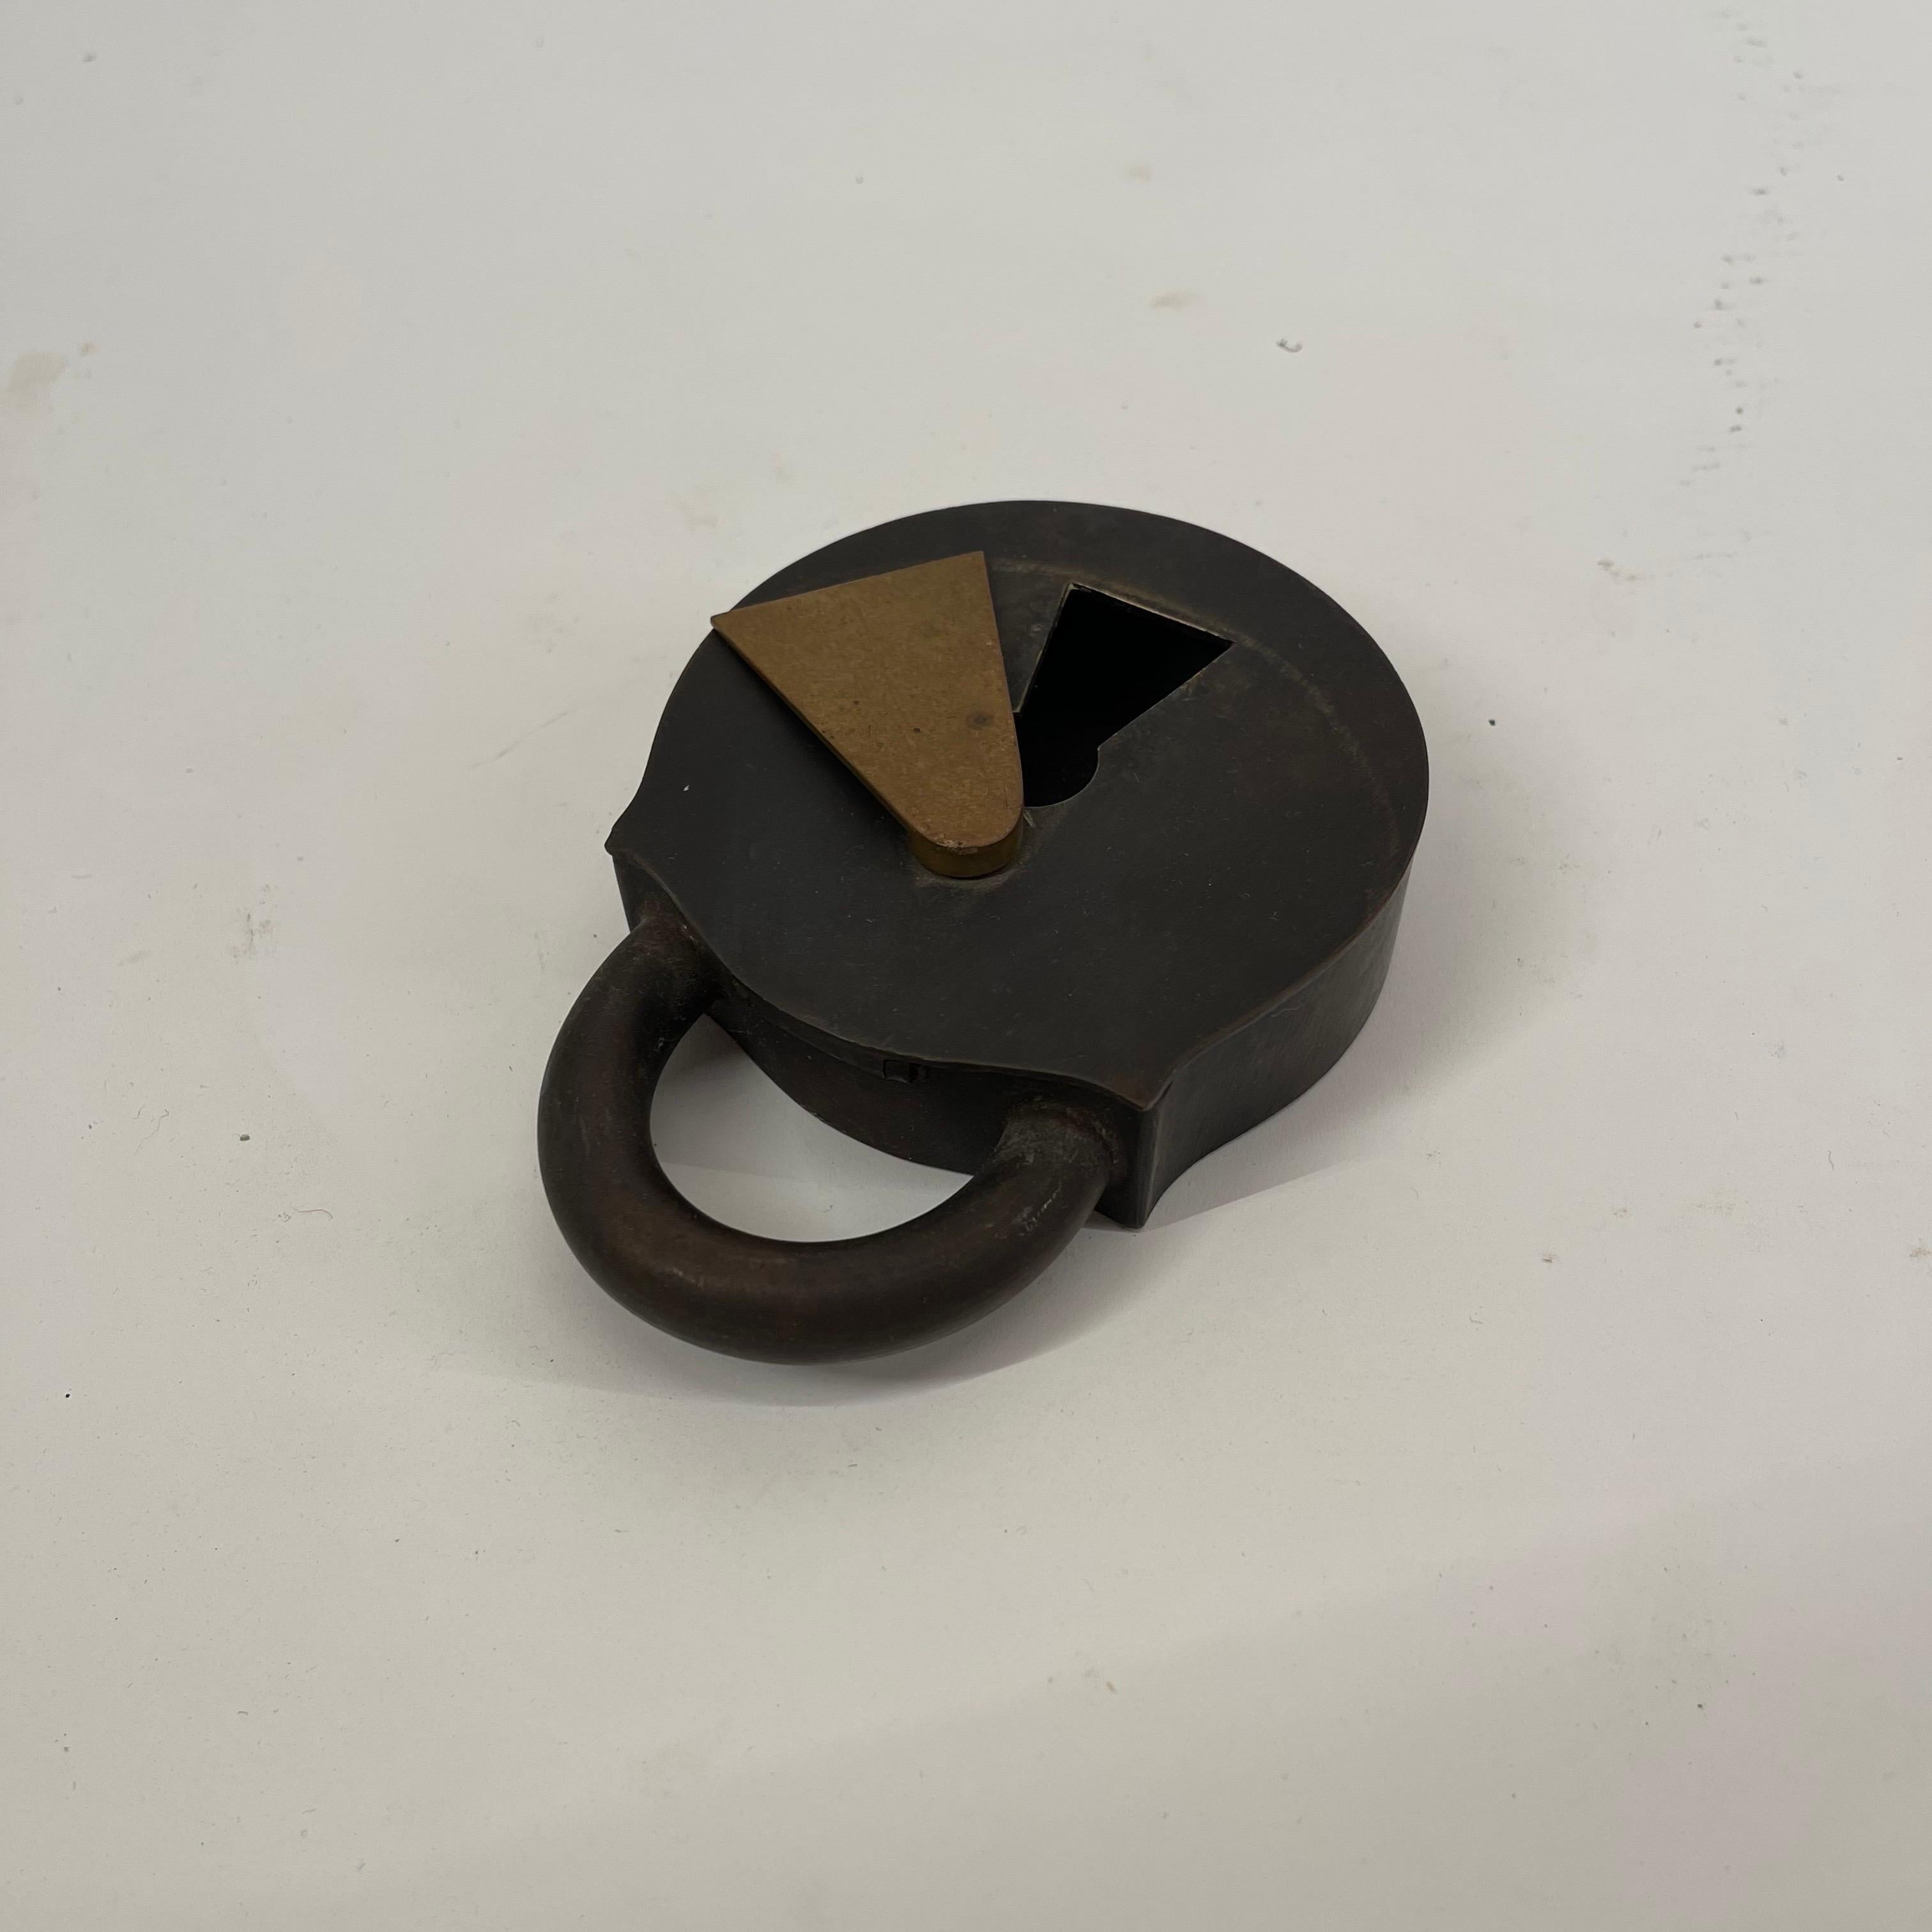 Blackened Carl Auböck II, Rare Mid-Century Modern Ashtray Paperweight Object For Sale